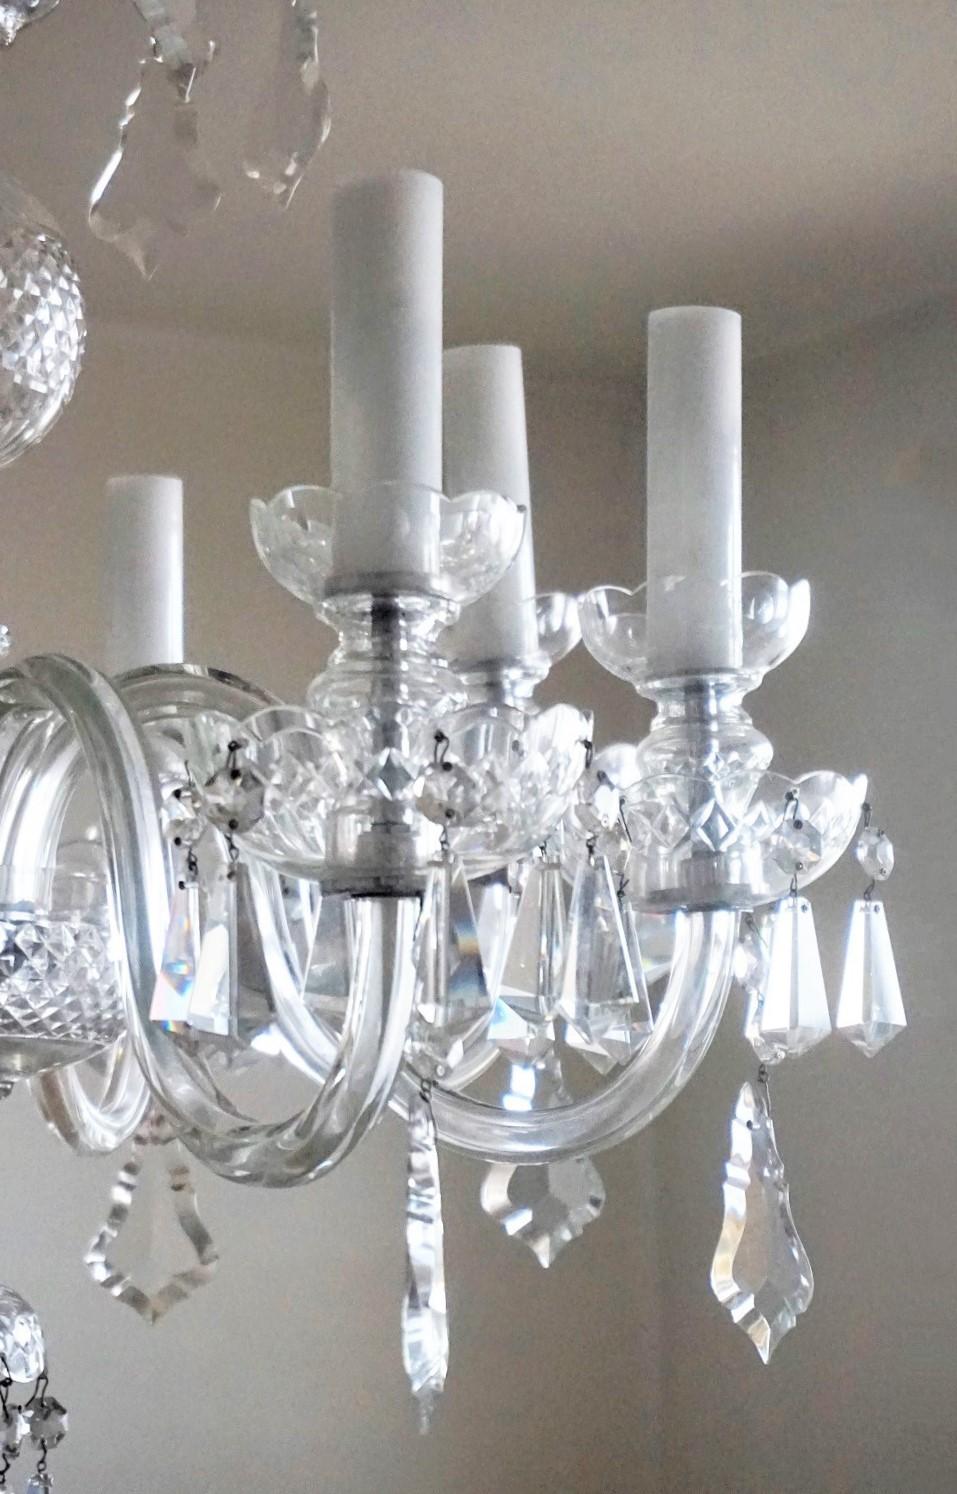 Large Original Venetian Handcrafted Murano Crystal Chandelier, Italy, 1910-1920 For Sale 2